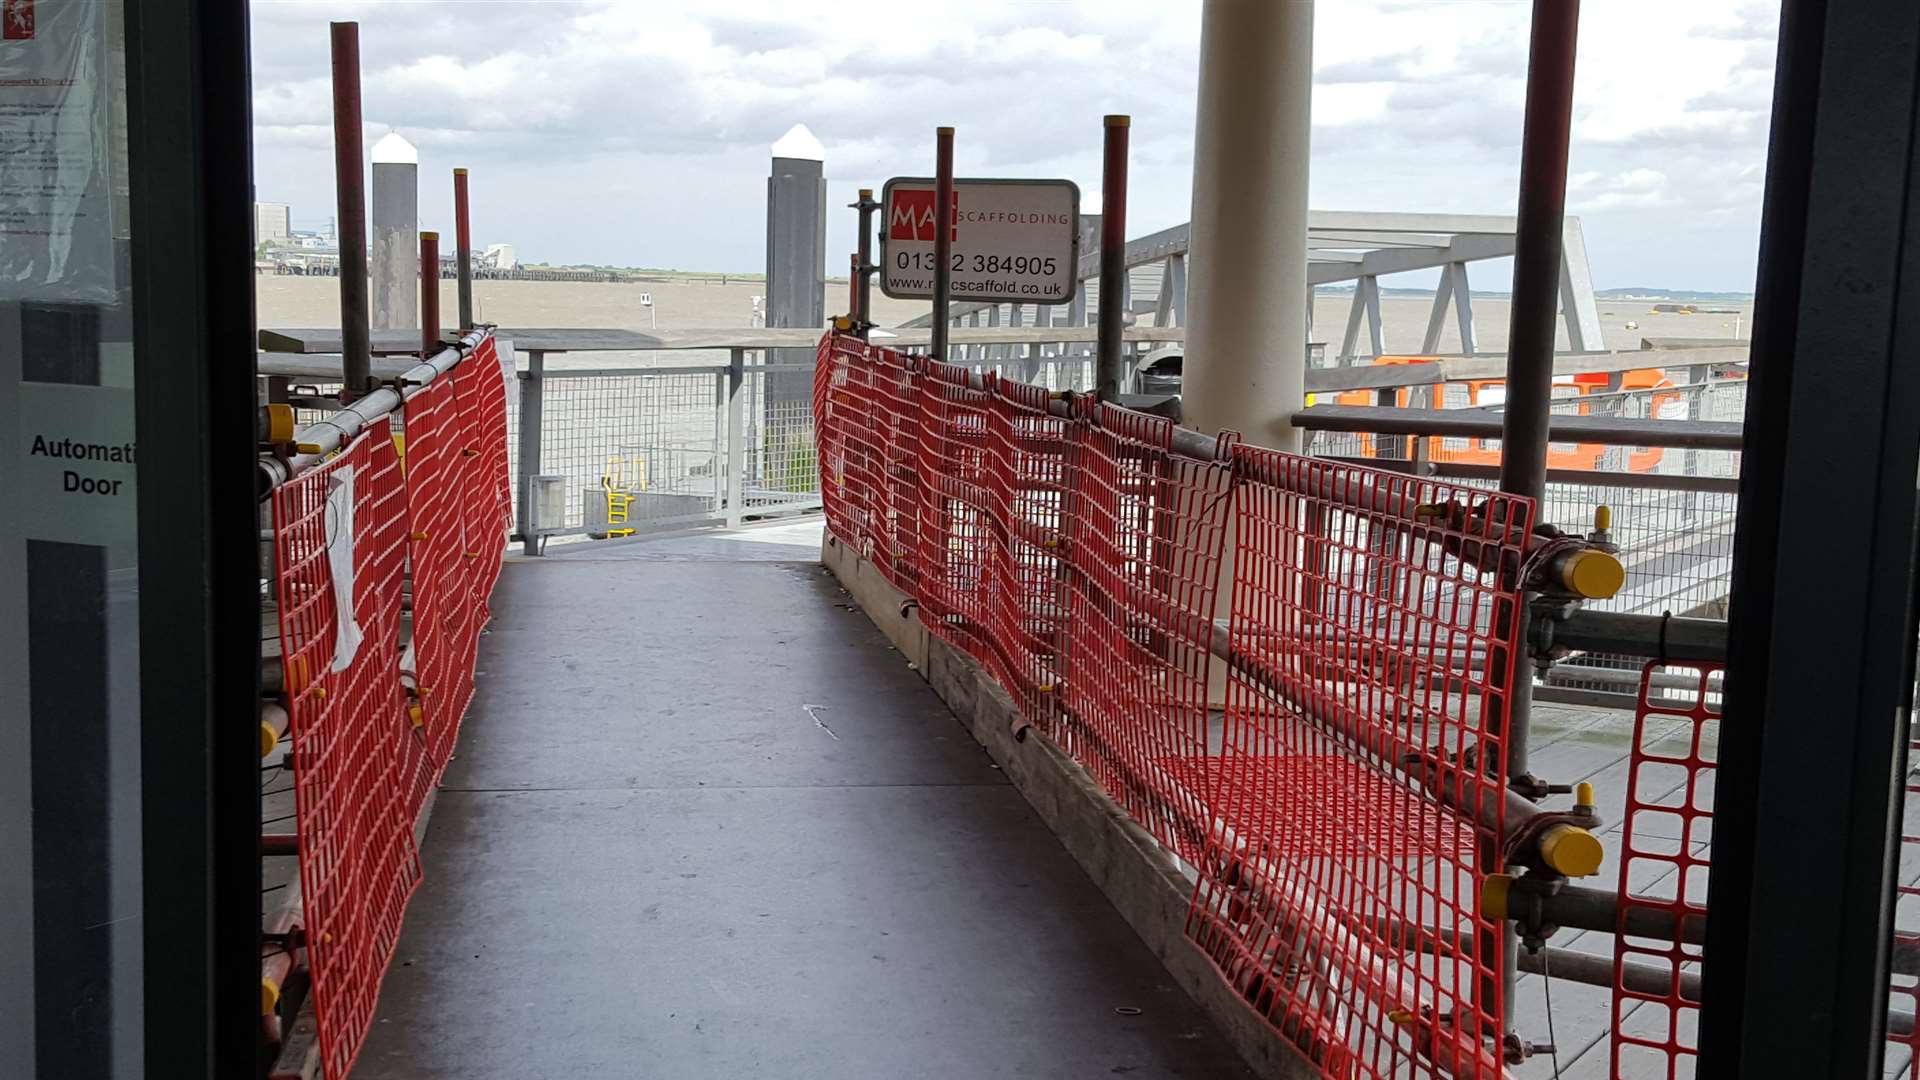 The pontoon leading from Gravesend Town Pier towards the ferry has been closed